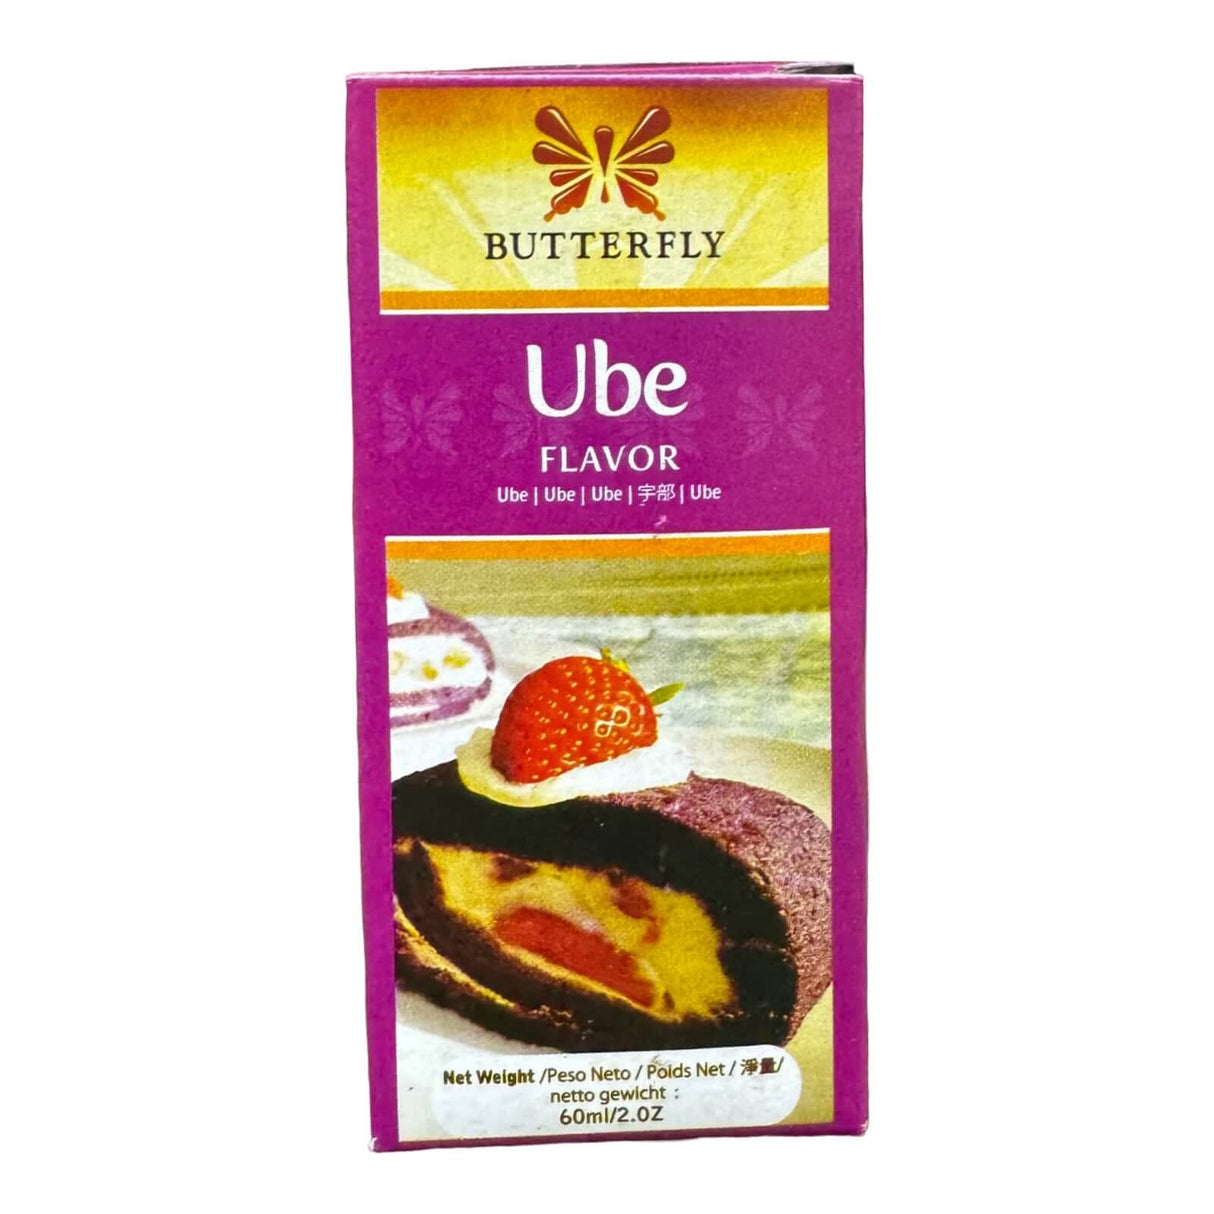 Butterfly Ube Flavor